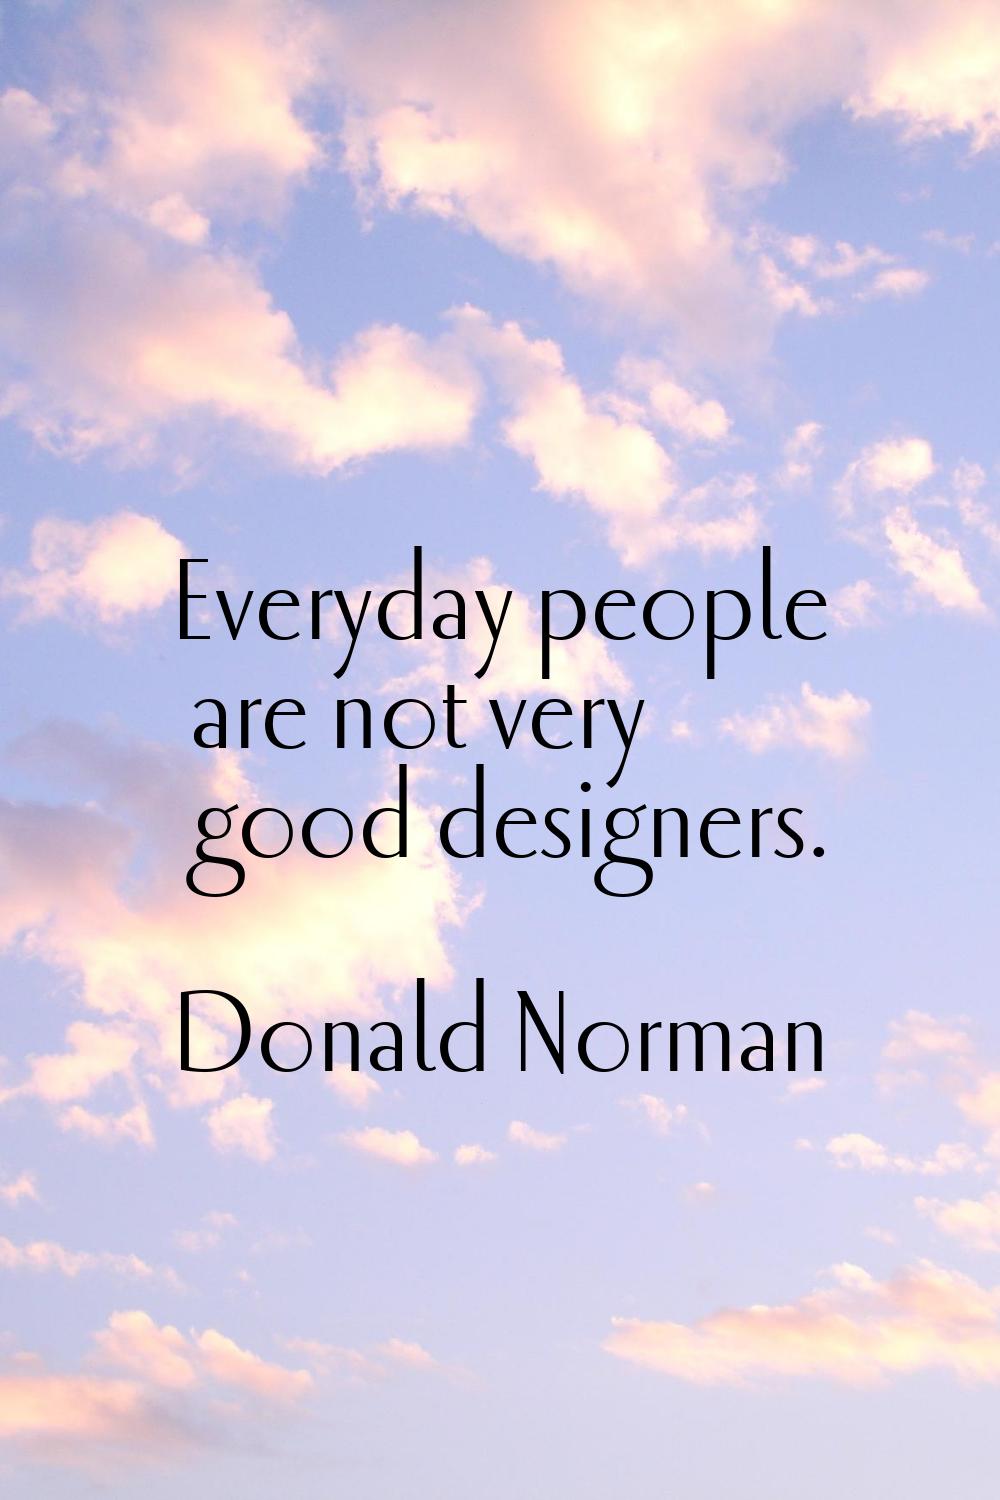 Everyday people are not very good designers.